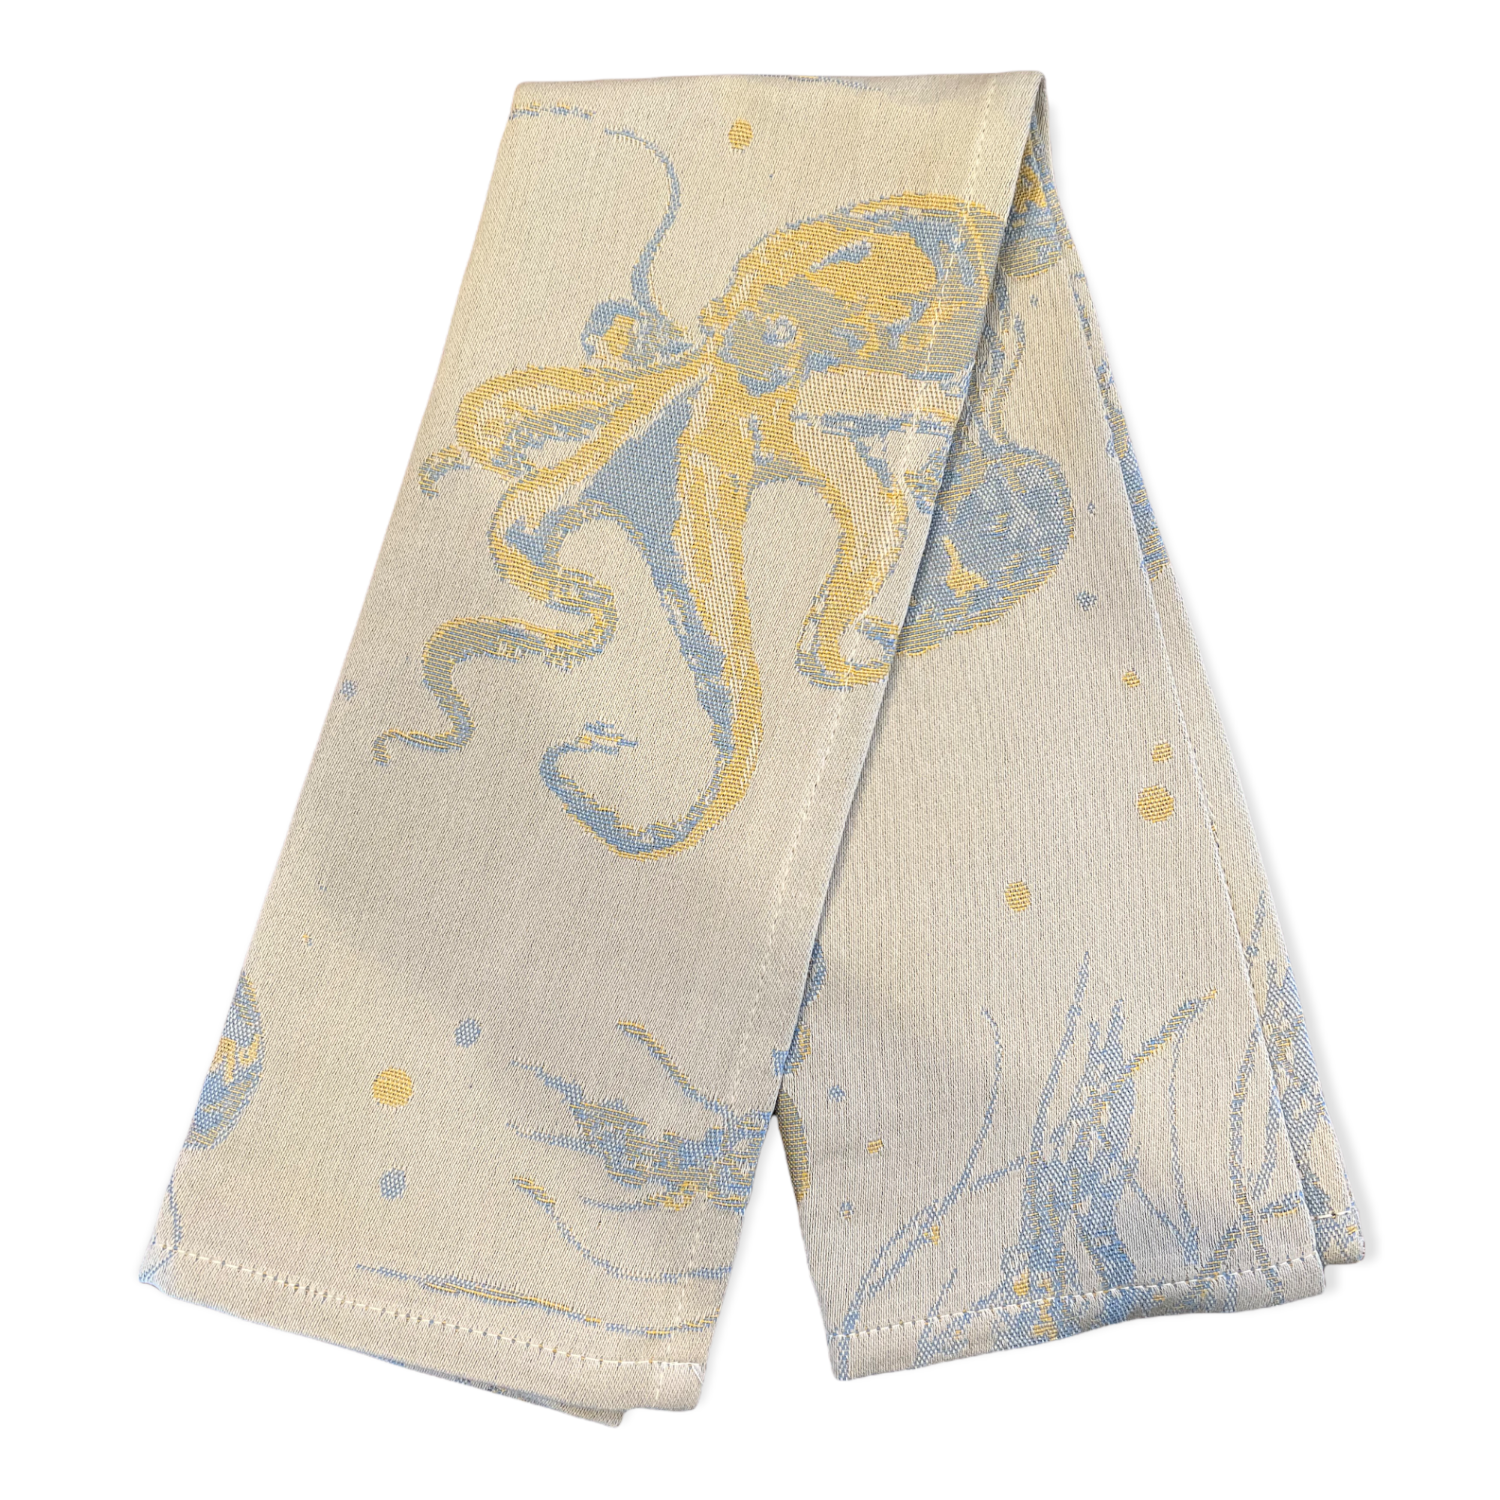 Medusa Sea Creatures Motif Kitchen Towel Made in Italy Timothy De Clue Collection Busatti 